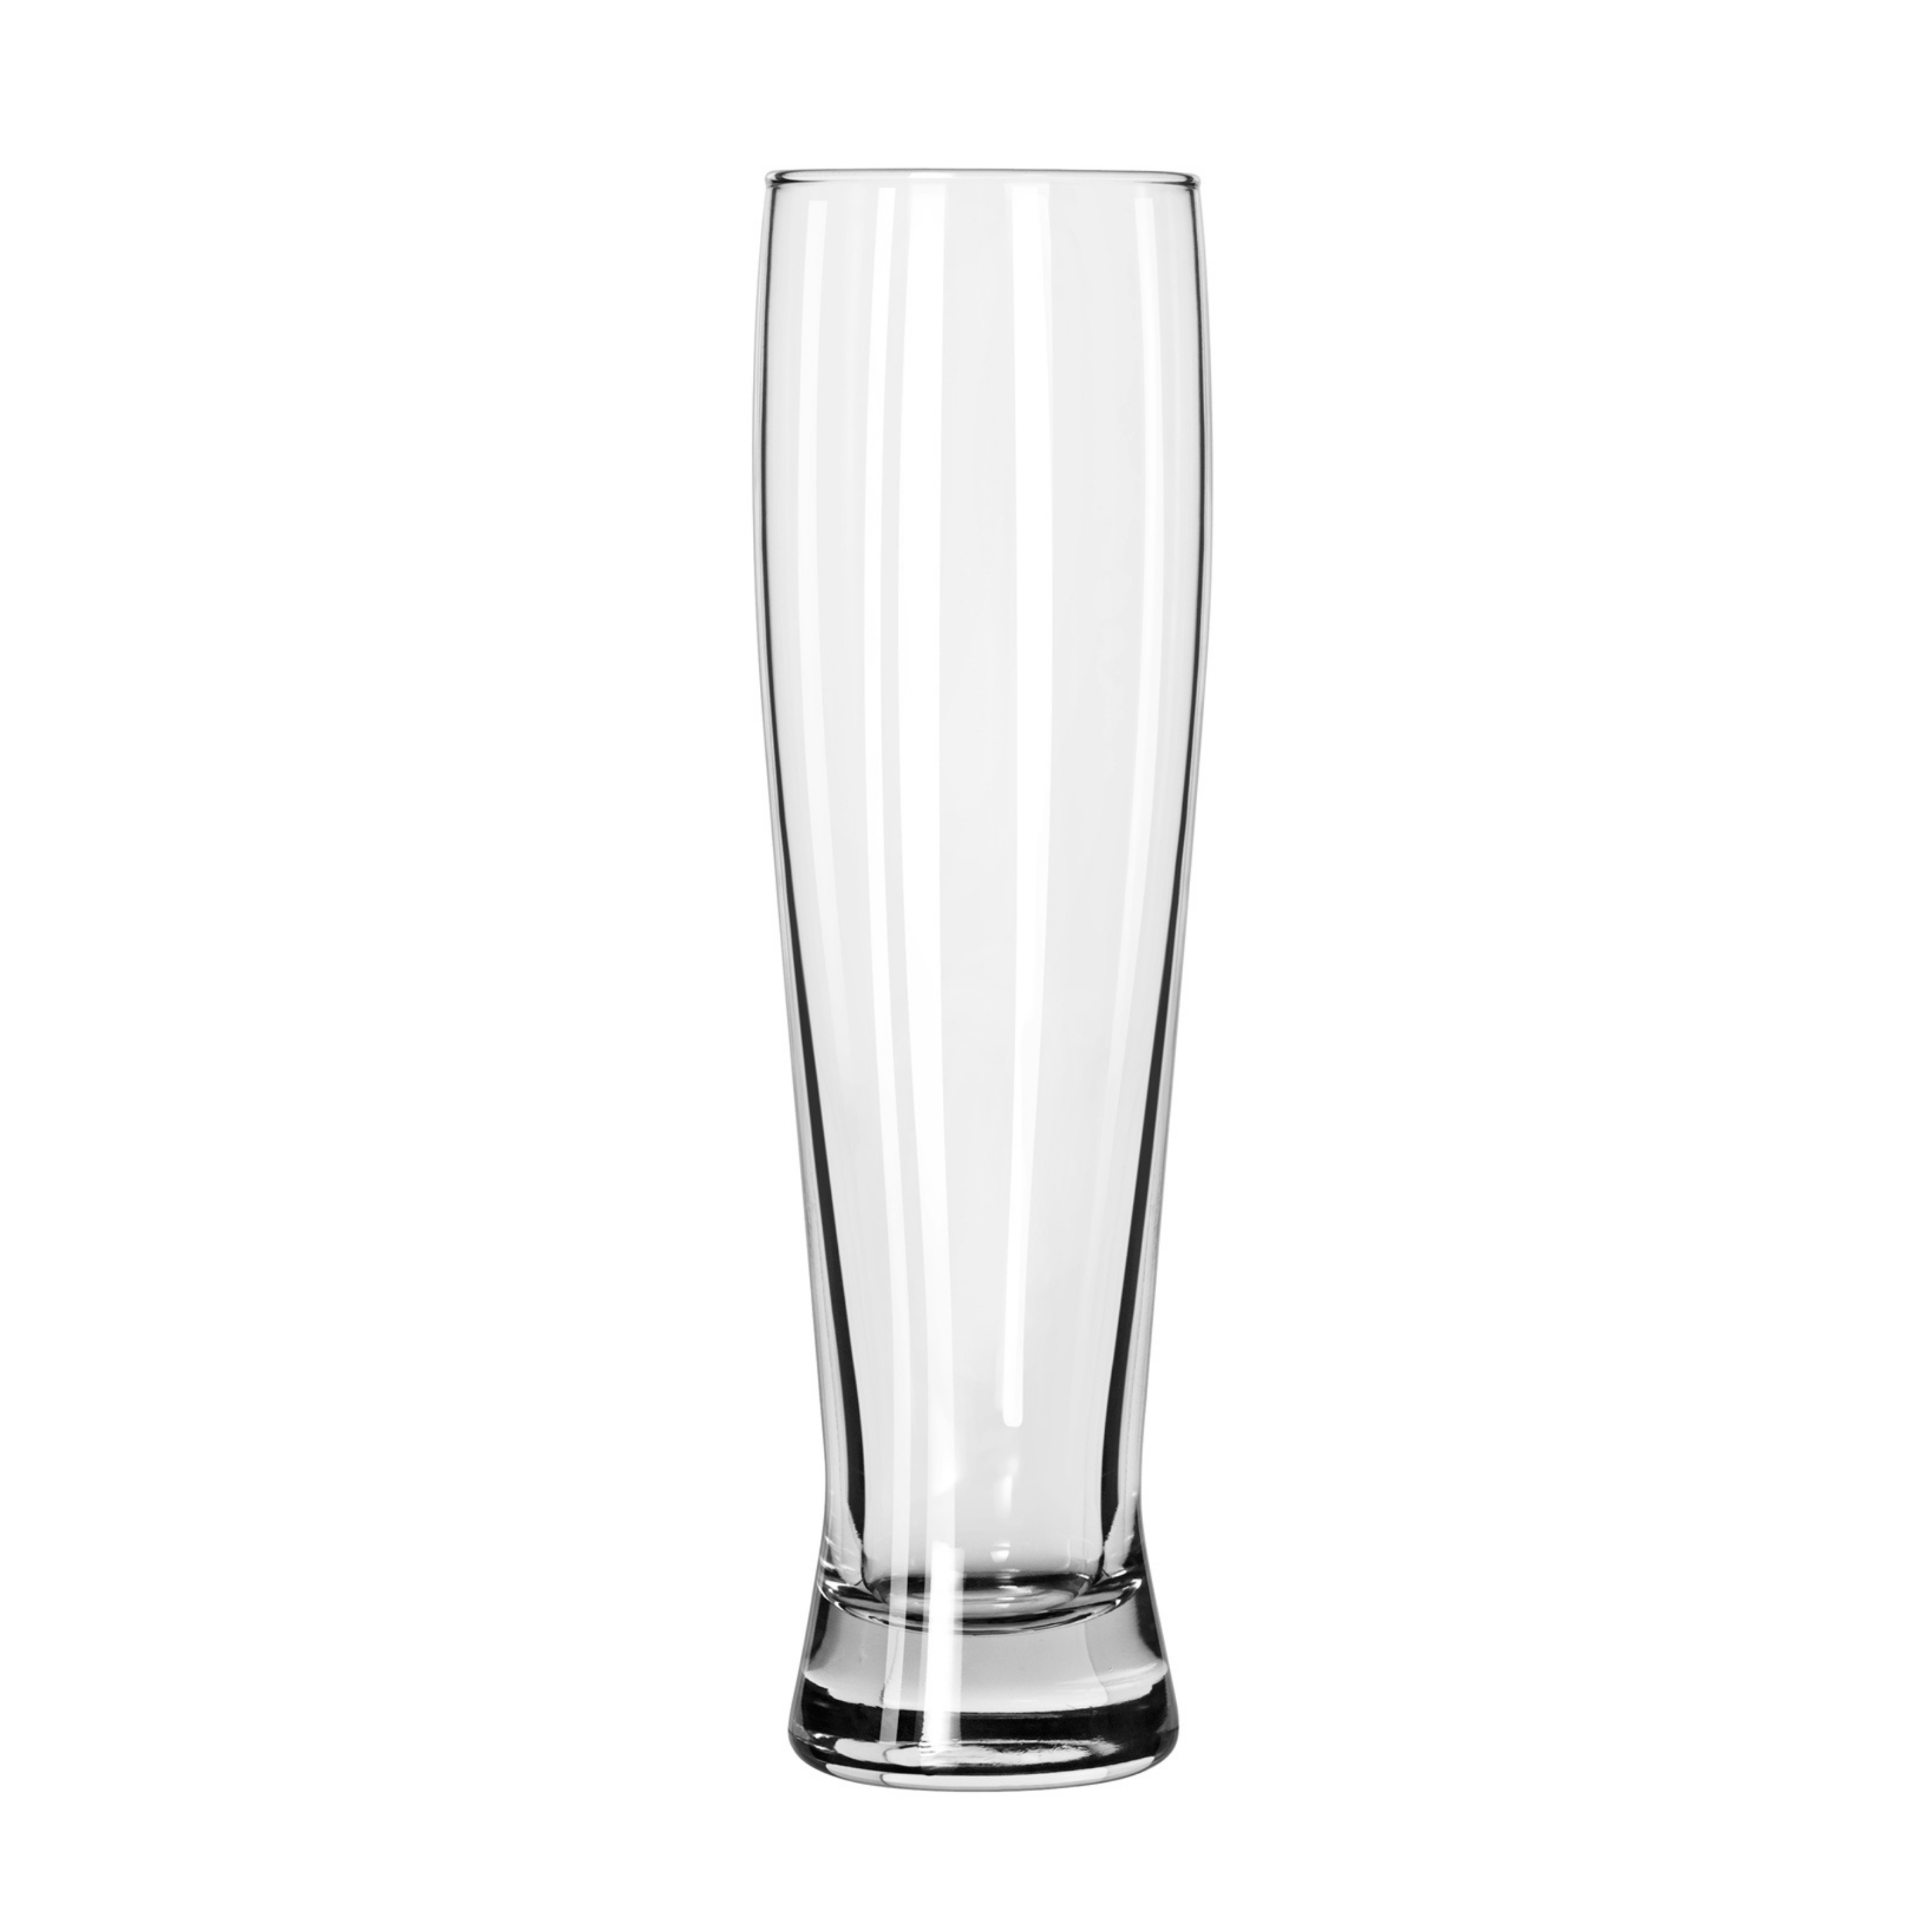 Barbuzzo Gone Fishing Pint Glass - 16 Oz Beer Tumbler with